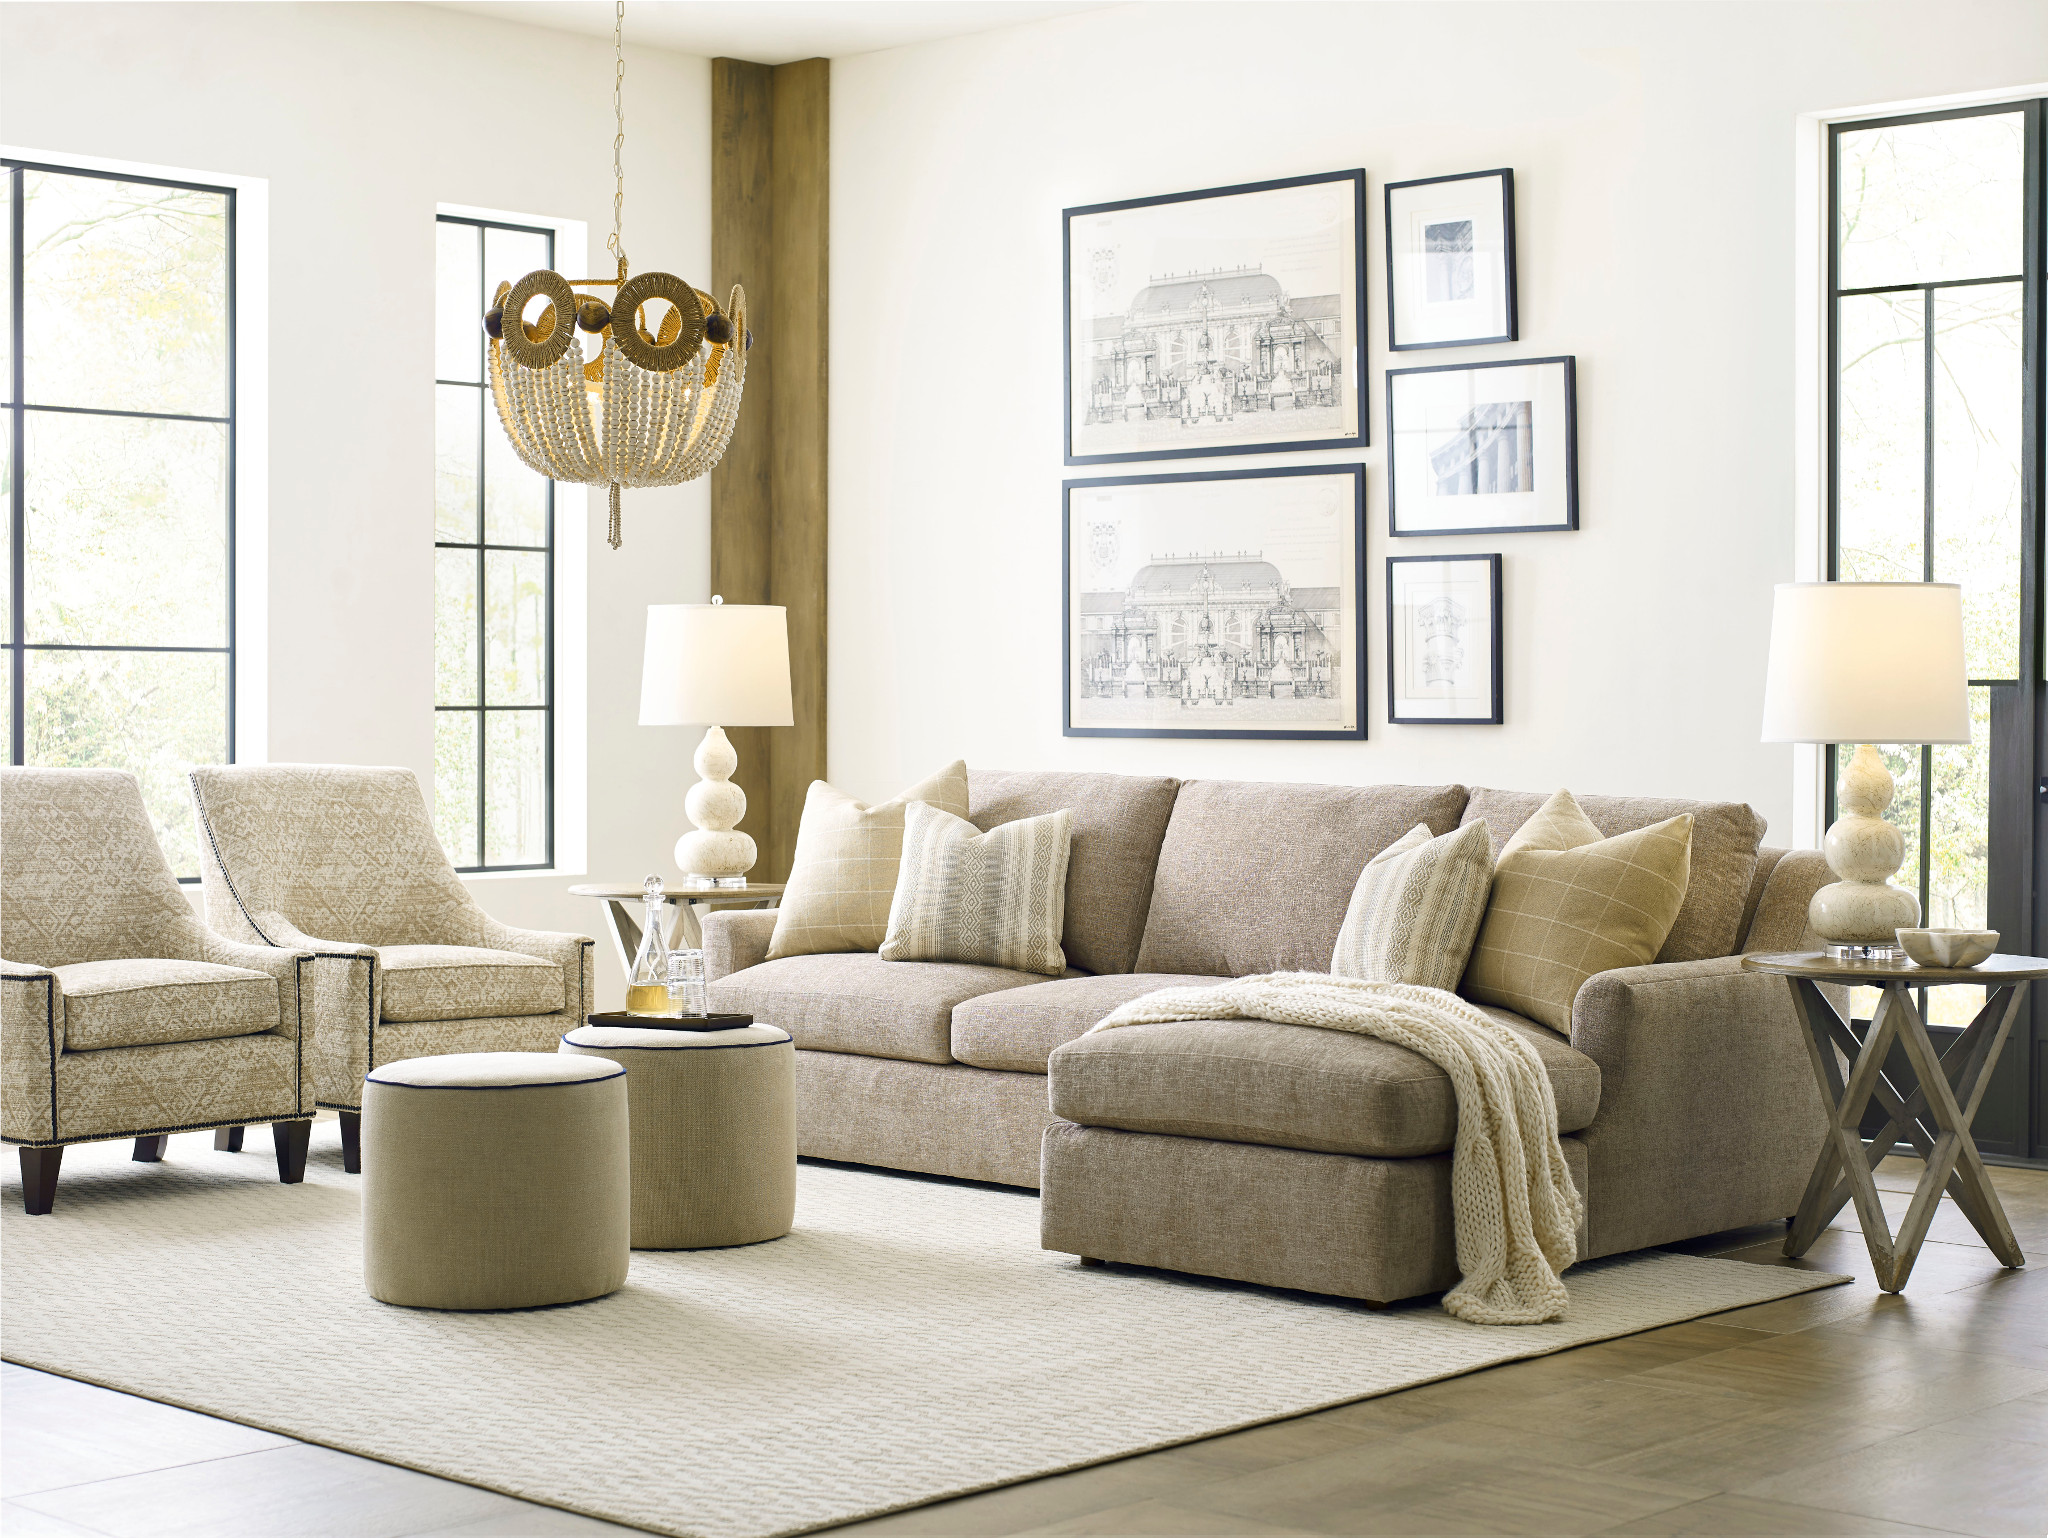 Five Tips For Decorating A Sectional EF Brannon Furniture